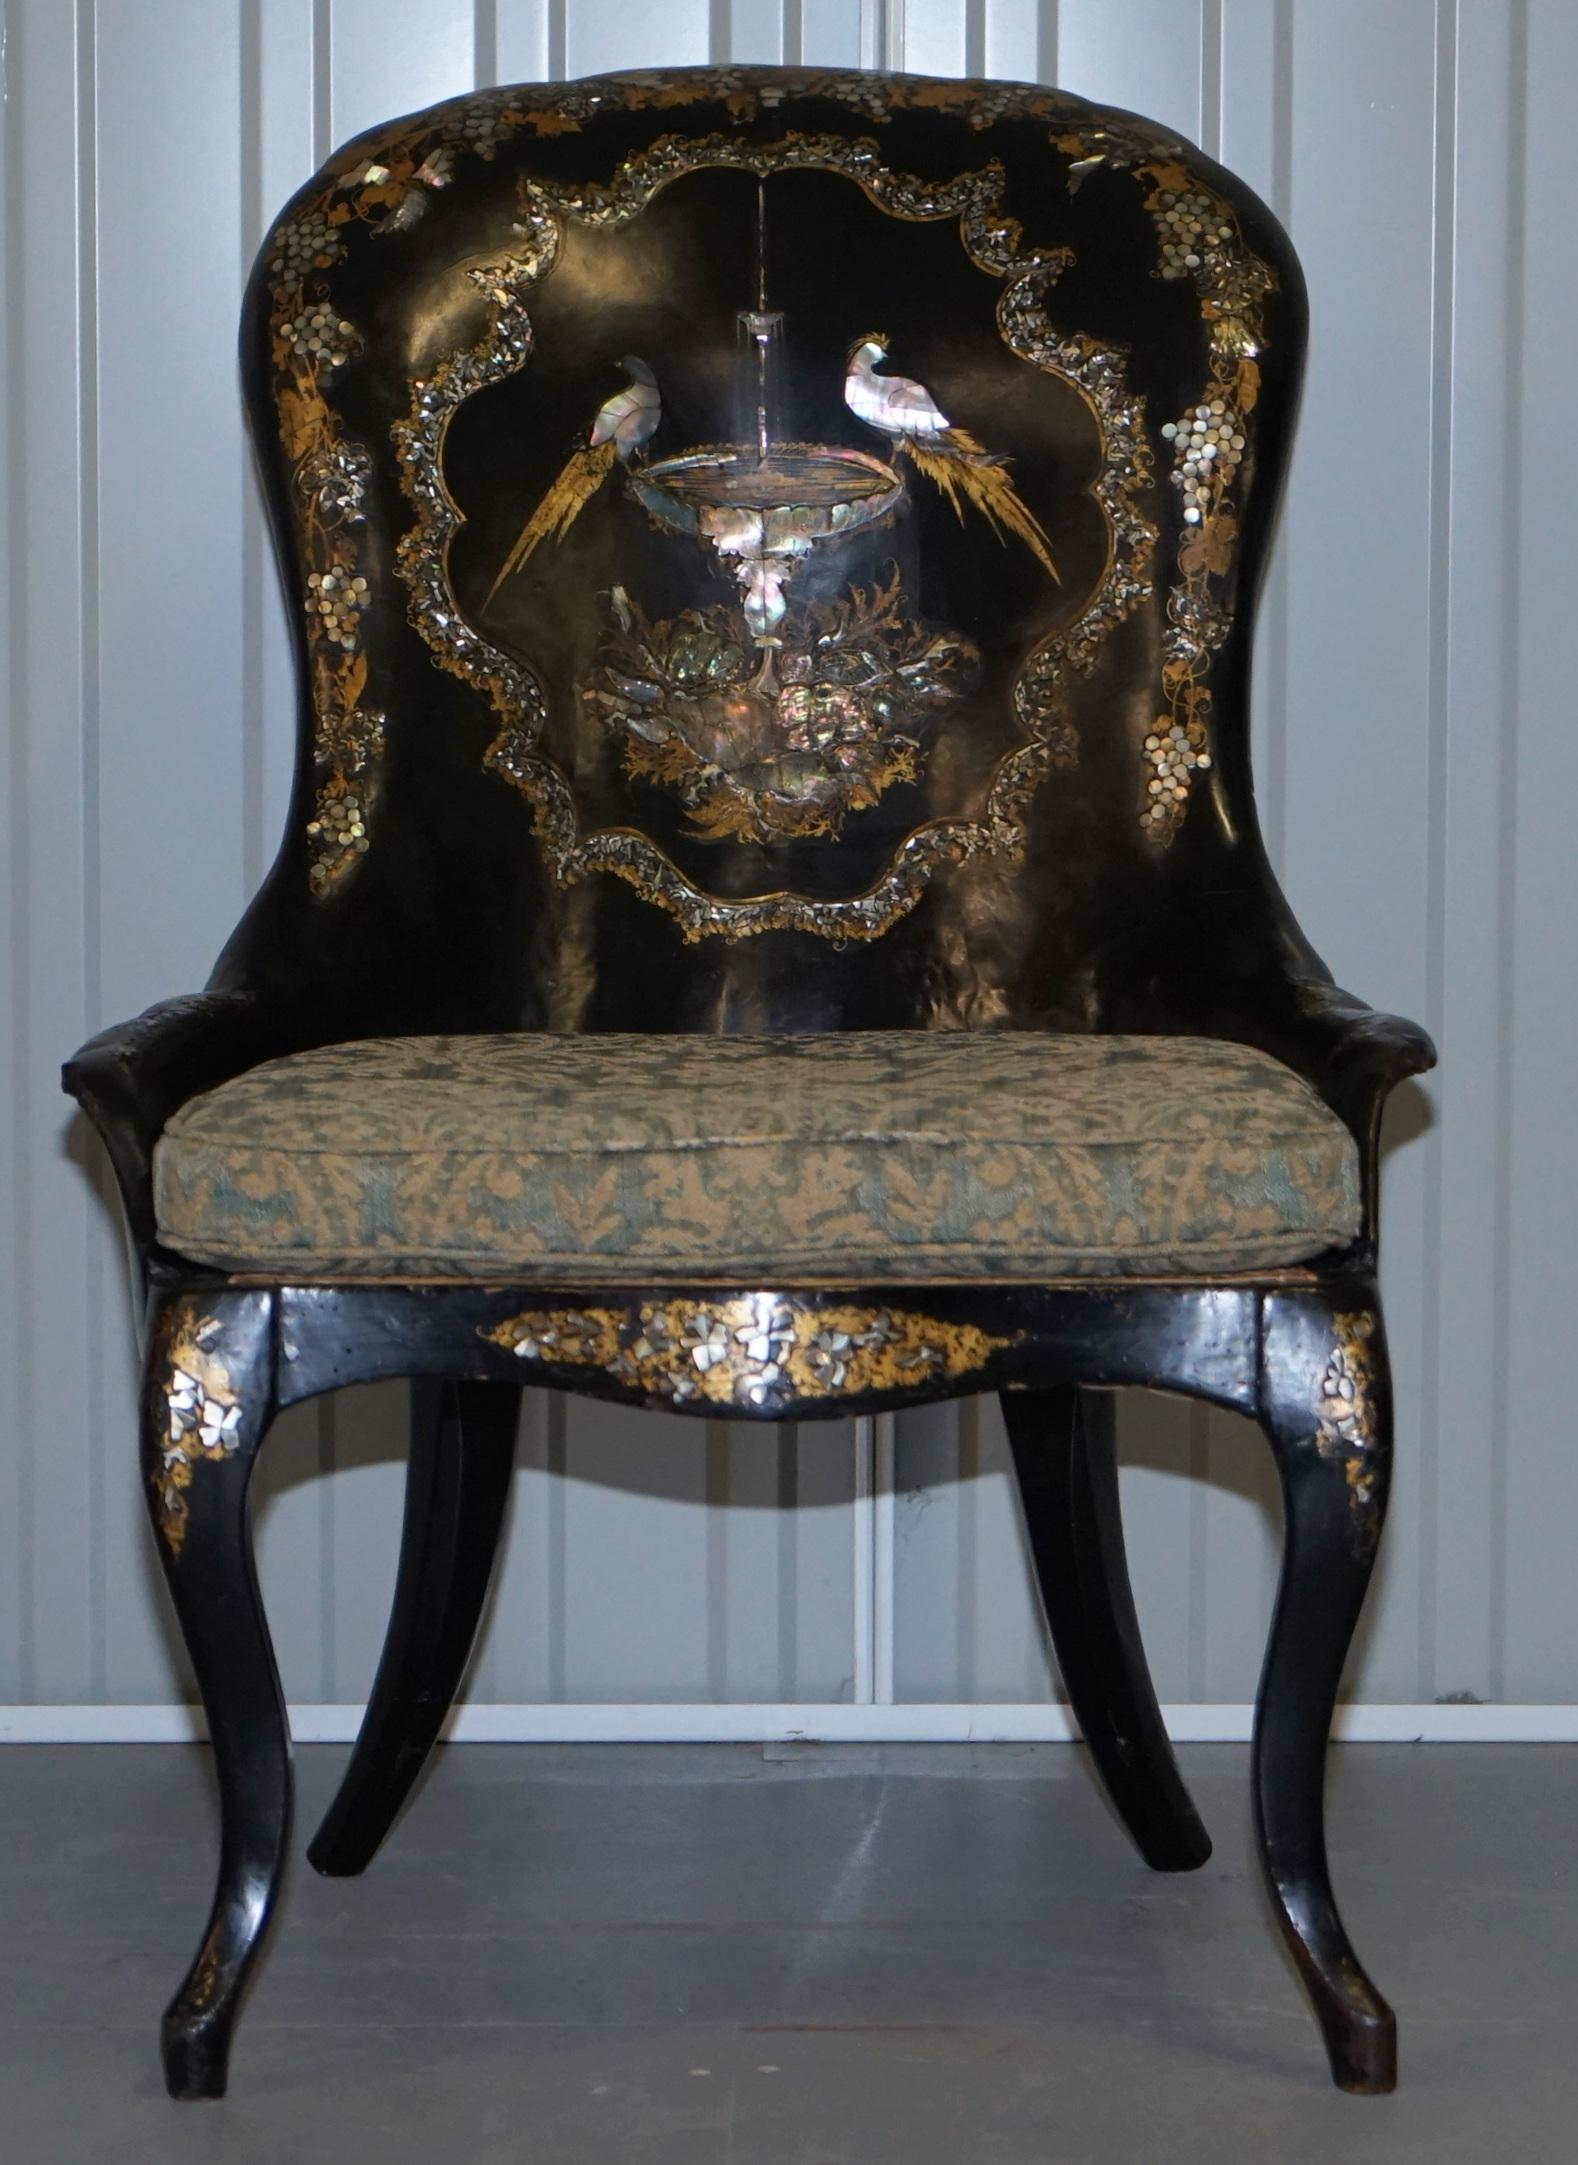 We are delighted to offer for sale this very rare Jenners & Bettrige Birmm London early 19th century parcel gilt papier mâché mother of pearl chair with bergère seat and inlaid tropical birds

A good looking and decorative piece, its early